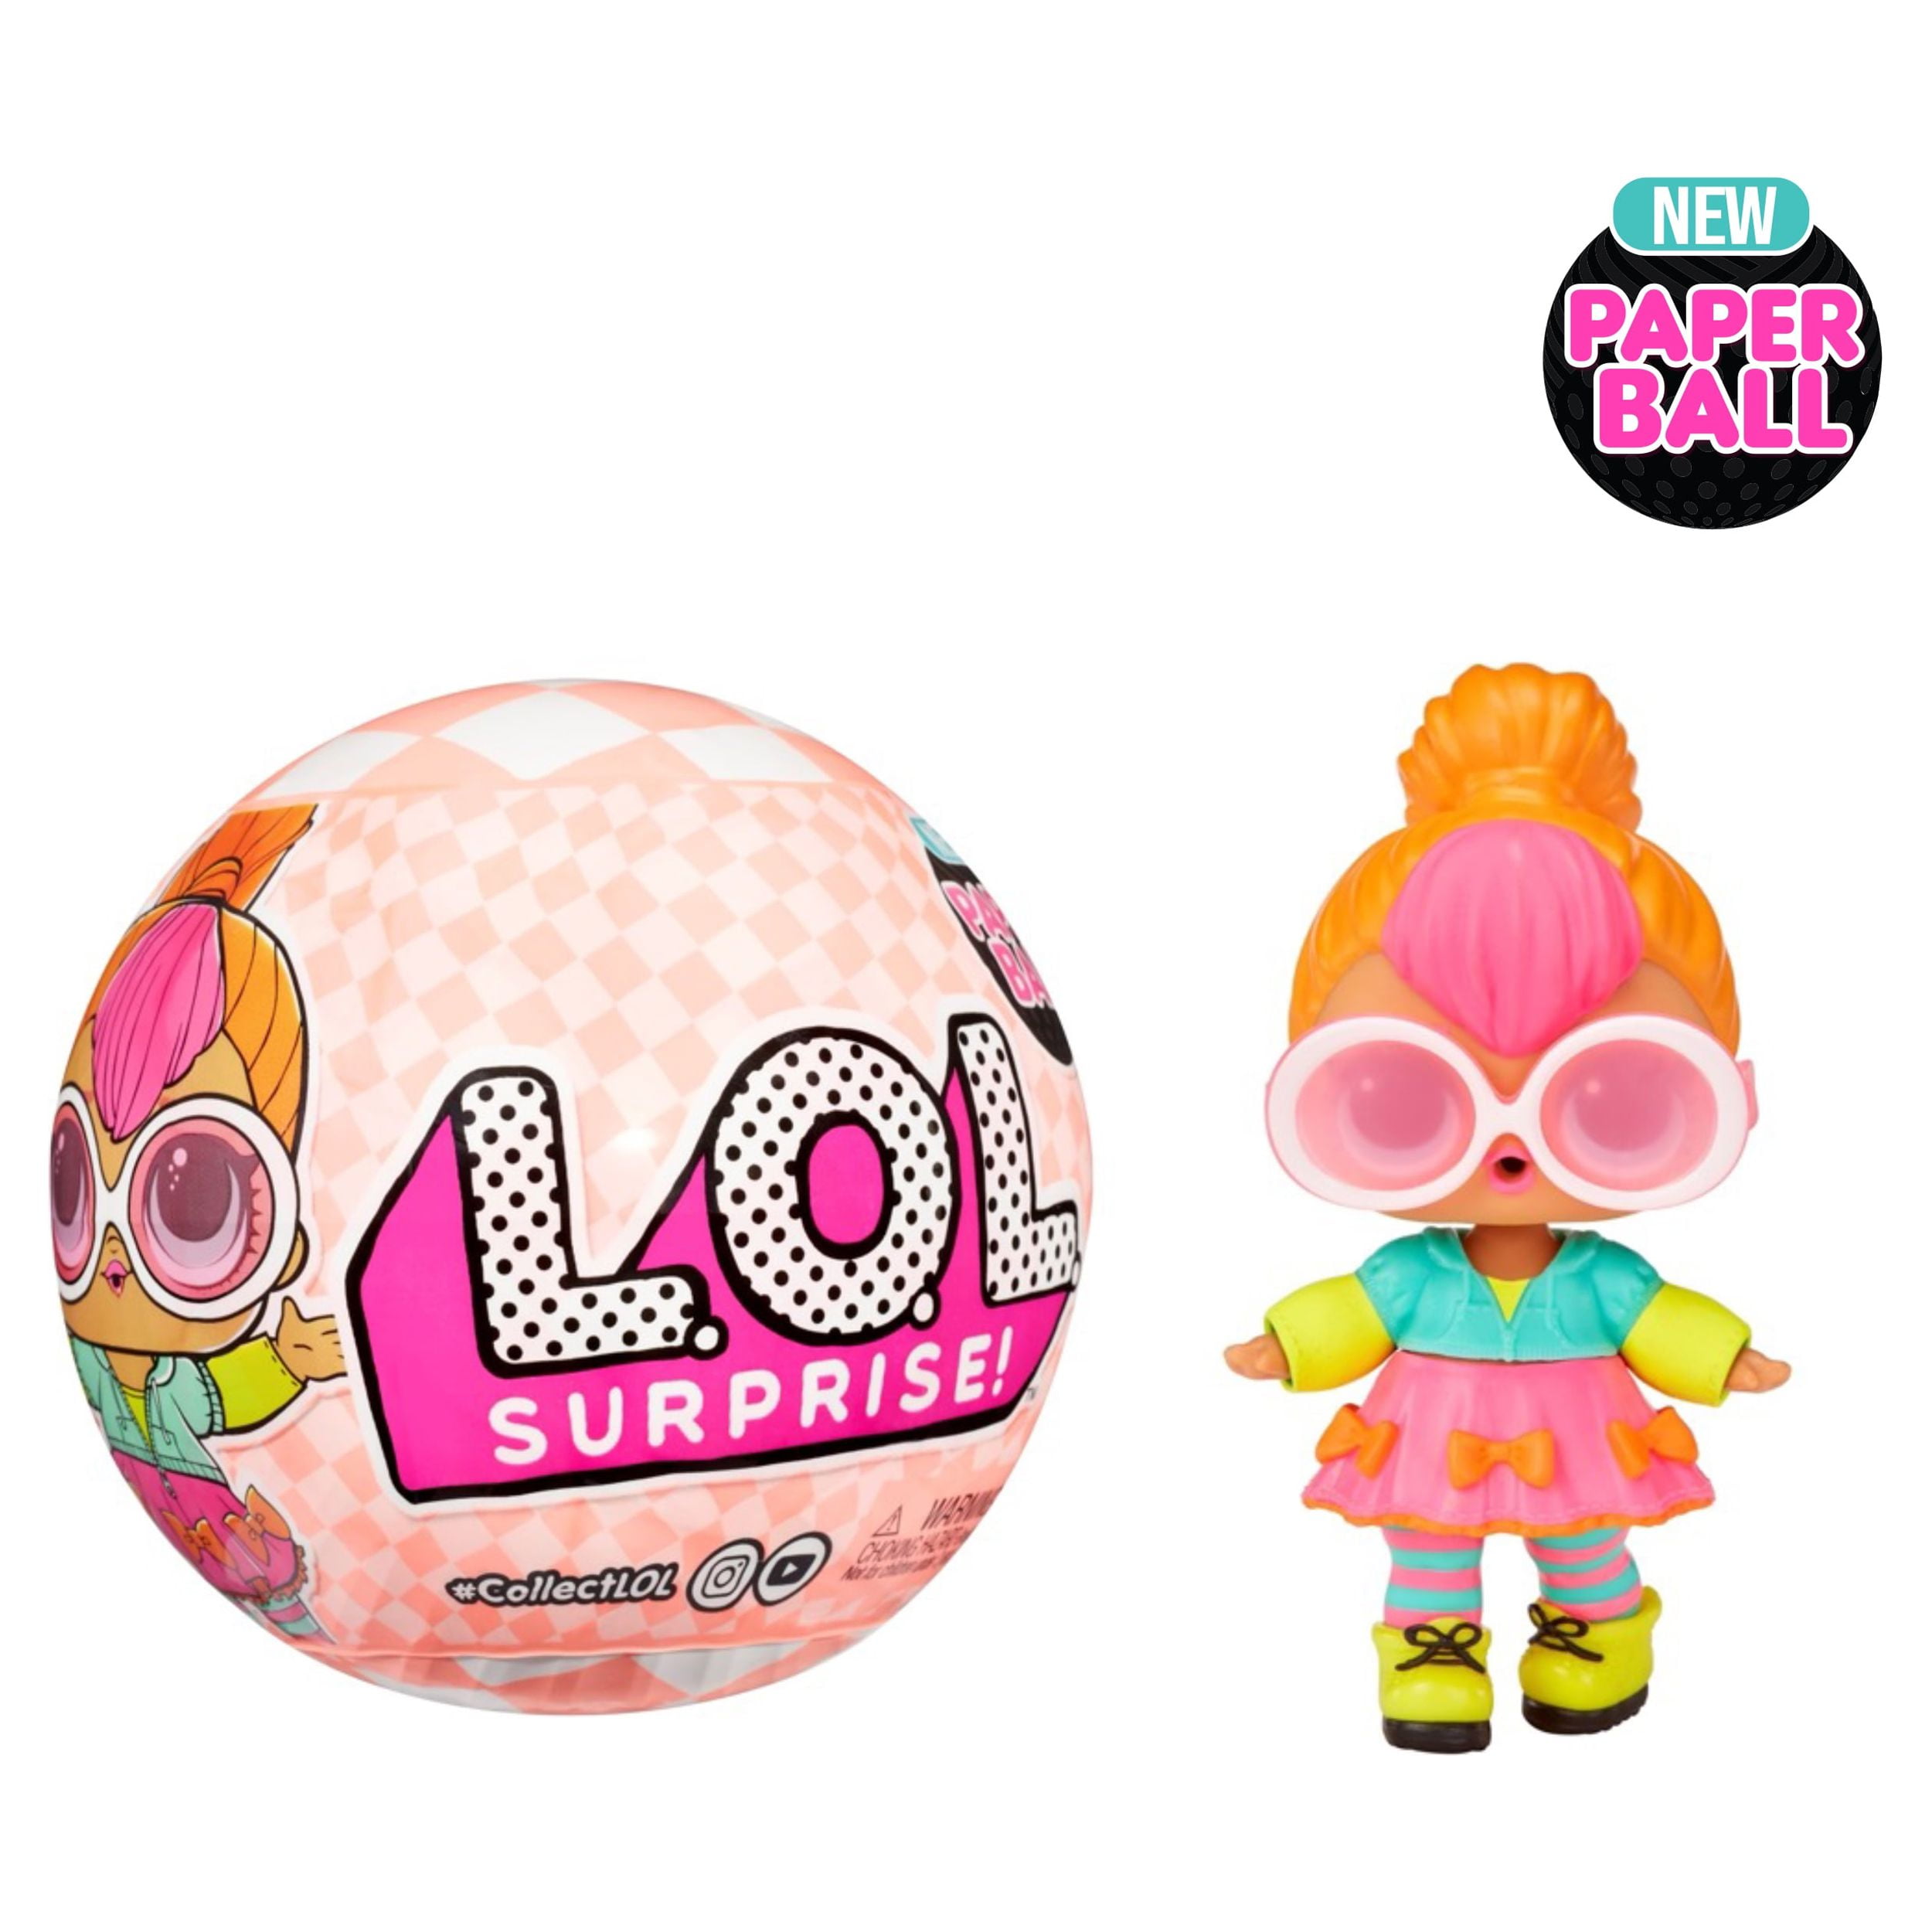 L.o.l. Surprise! Loves Mini Sweets Series 3 With 7 Surprises & Limited  Edition Doll : Target